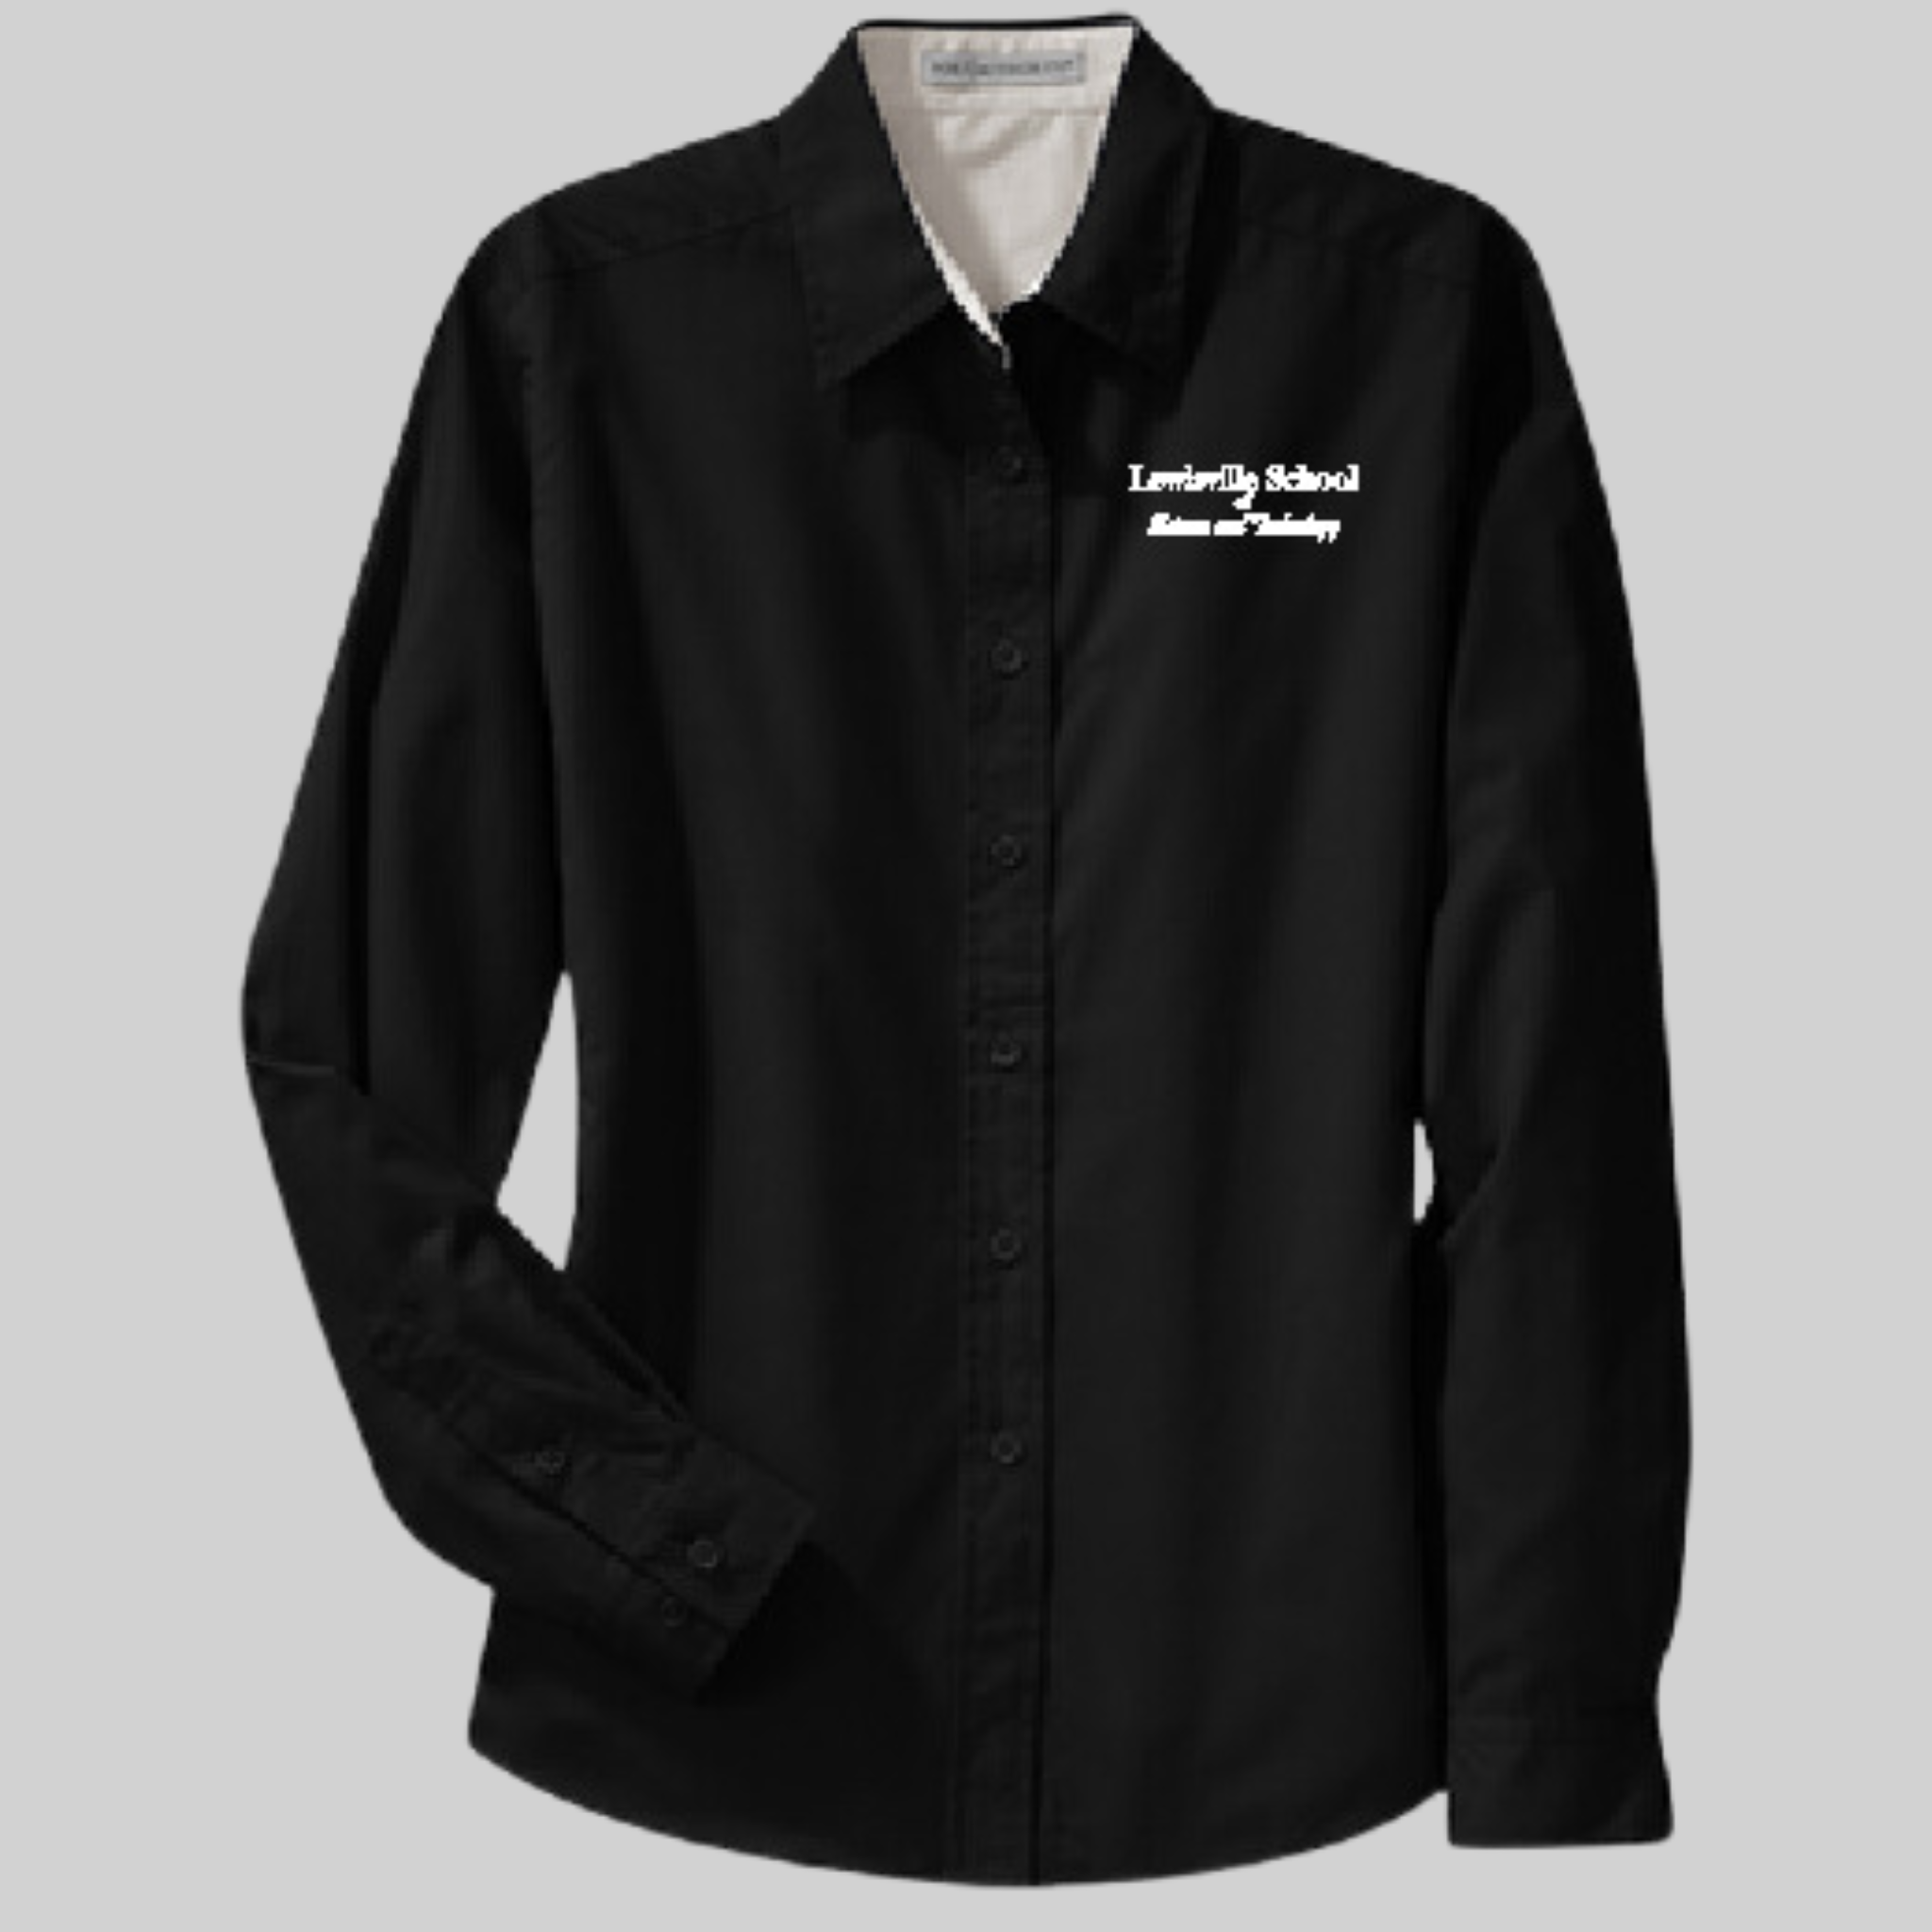 Personalized dress business shirt long sleeved poplin shirt Port Authority  w button down collar - your name and/or logo above pocket